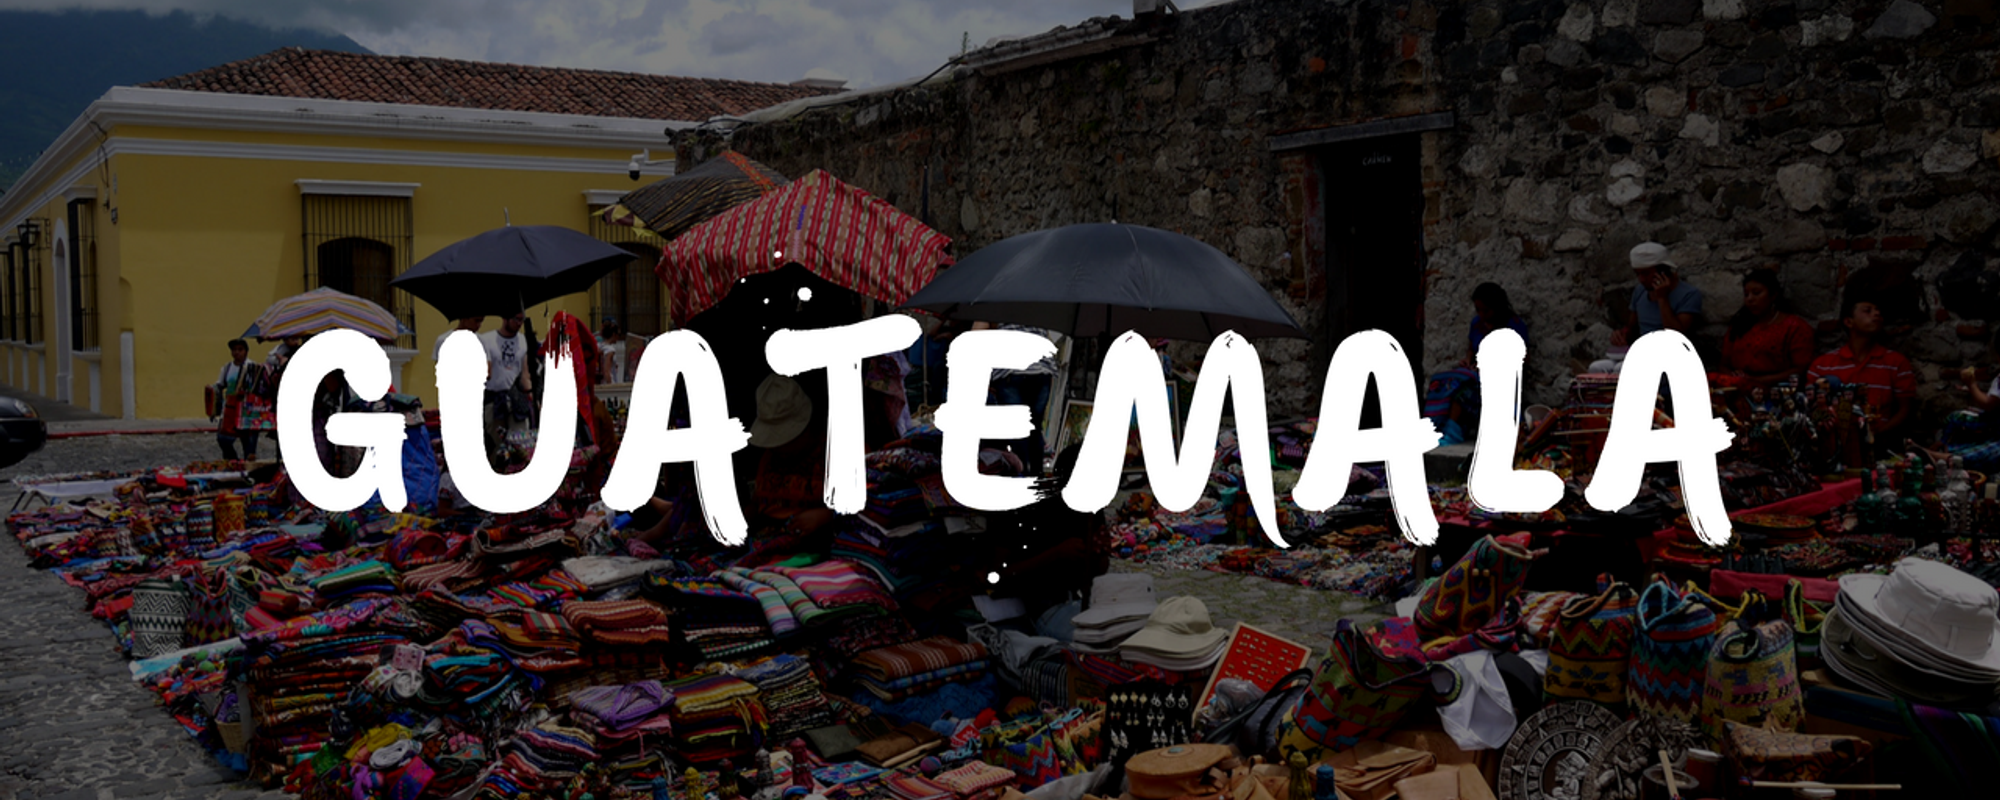 Tips and Tricks for a Guatemalan trip